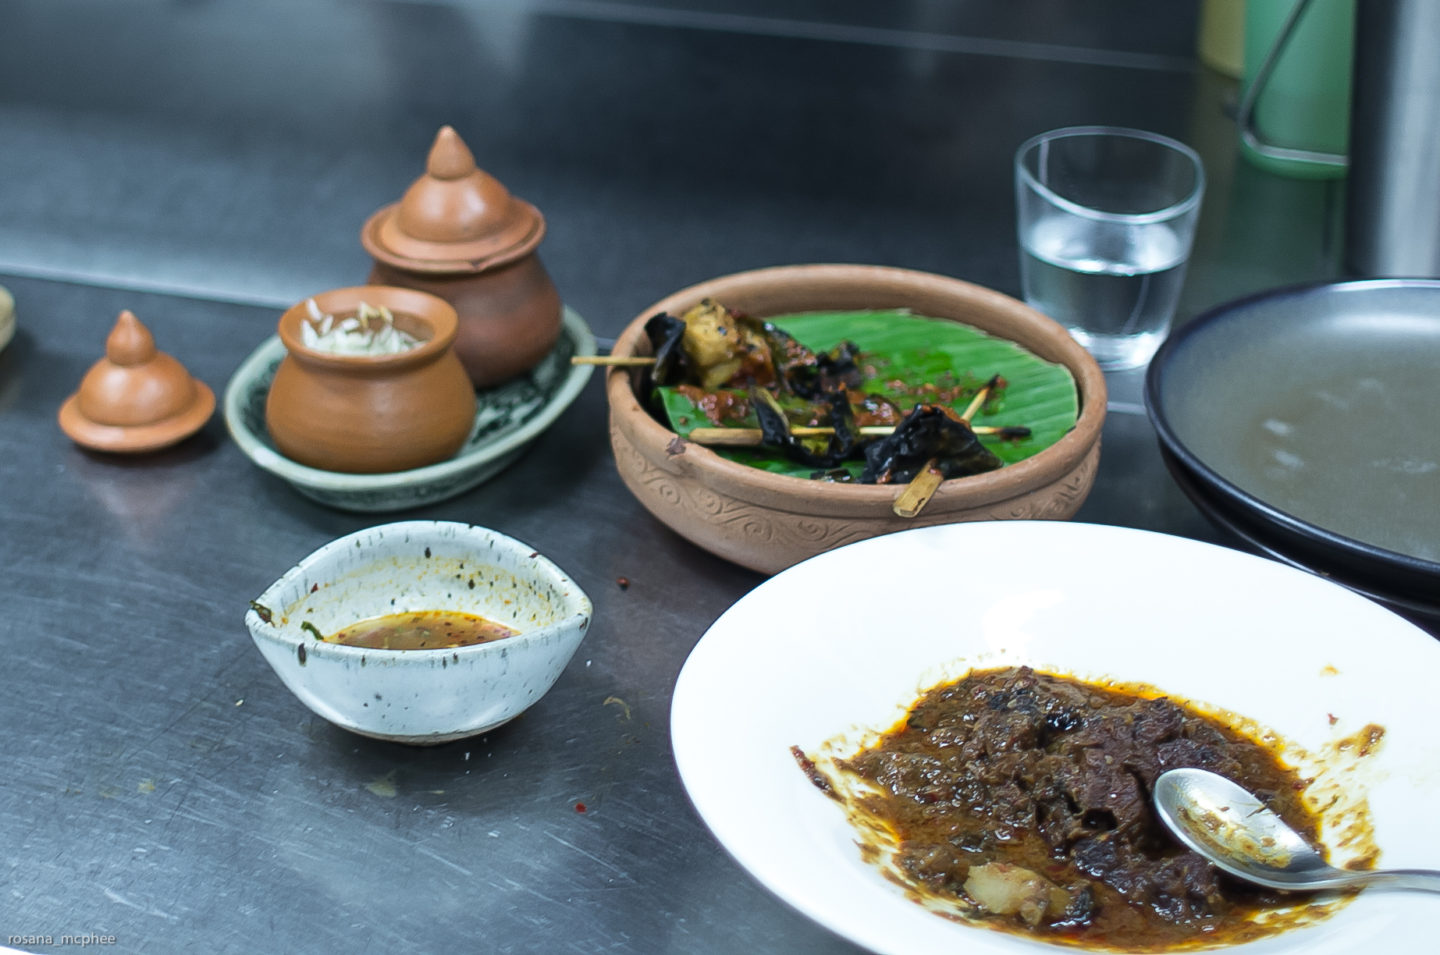 Slow cooked beef by Siam Wisdom, gastronomic experience in Bangkok and beyond